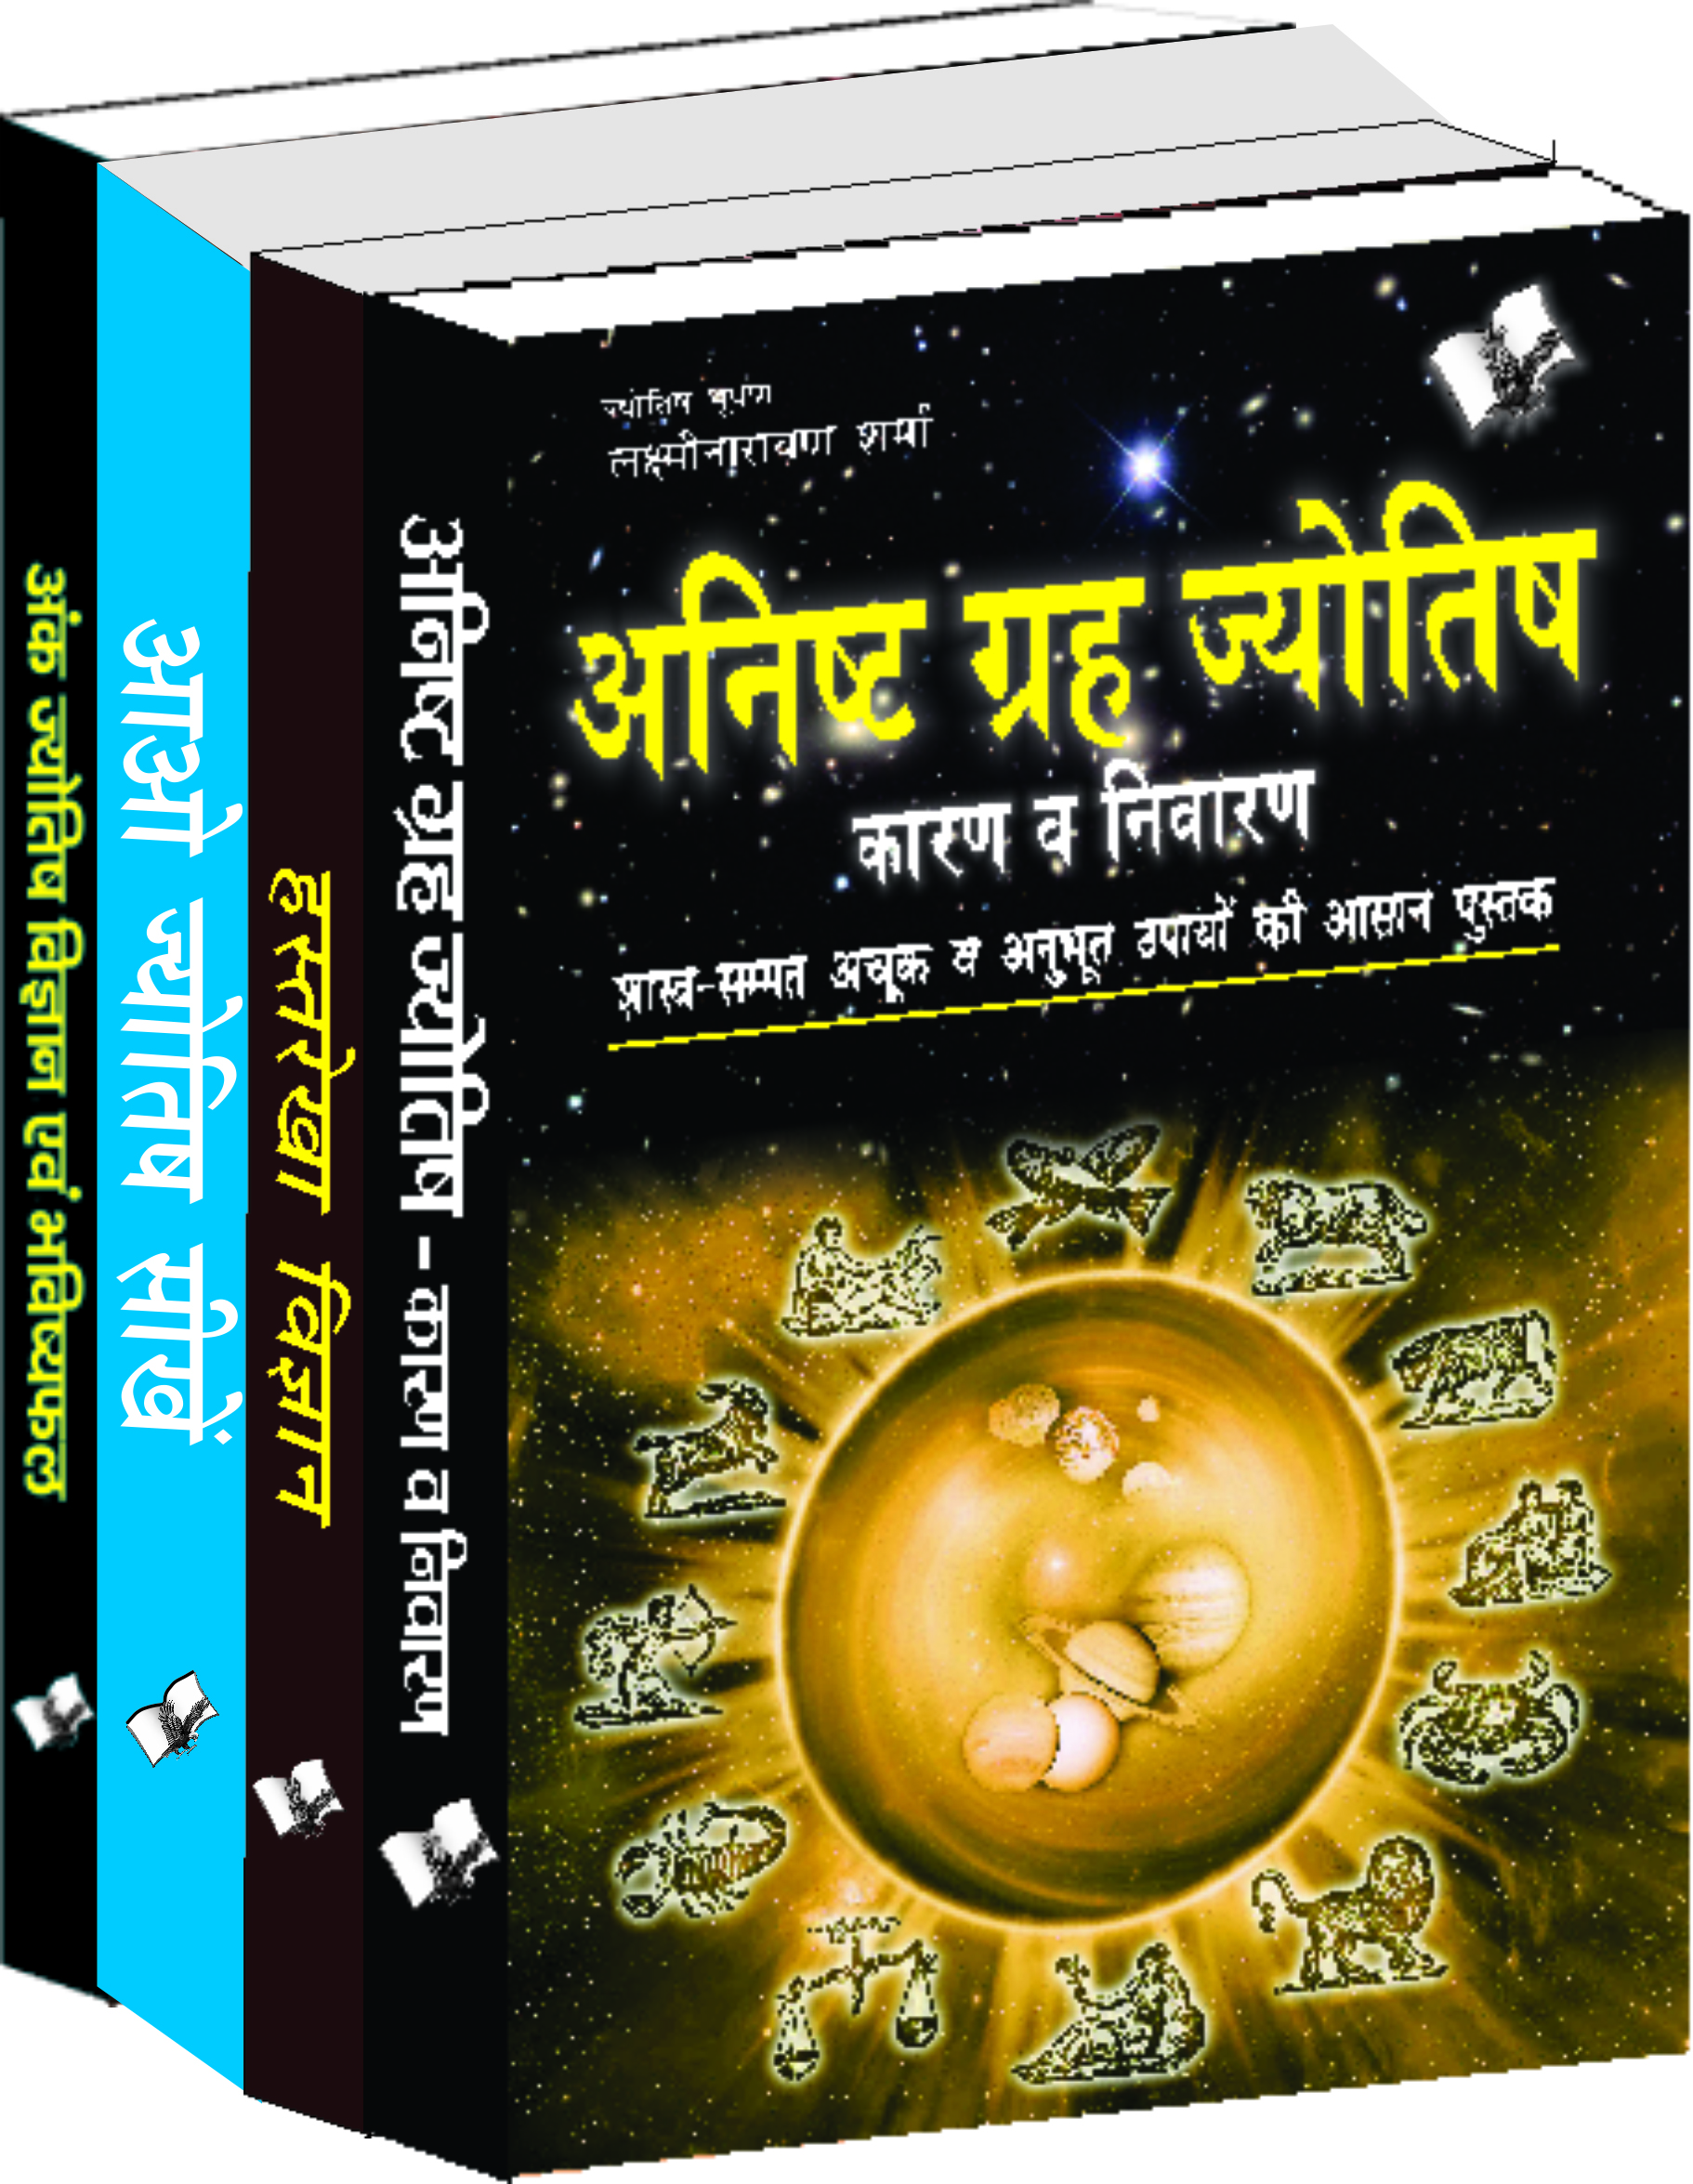 Jyotish Value Pack-A set of books on astrology to help improve our lives